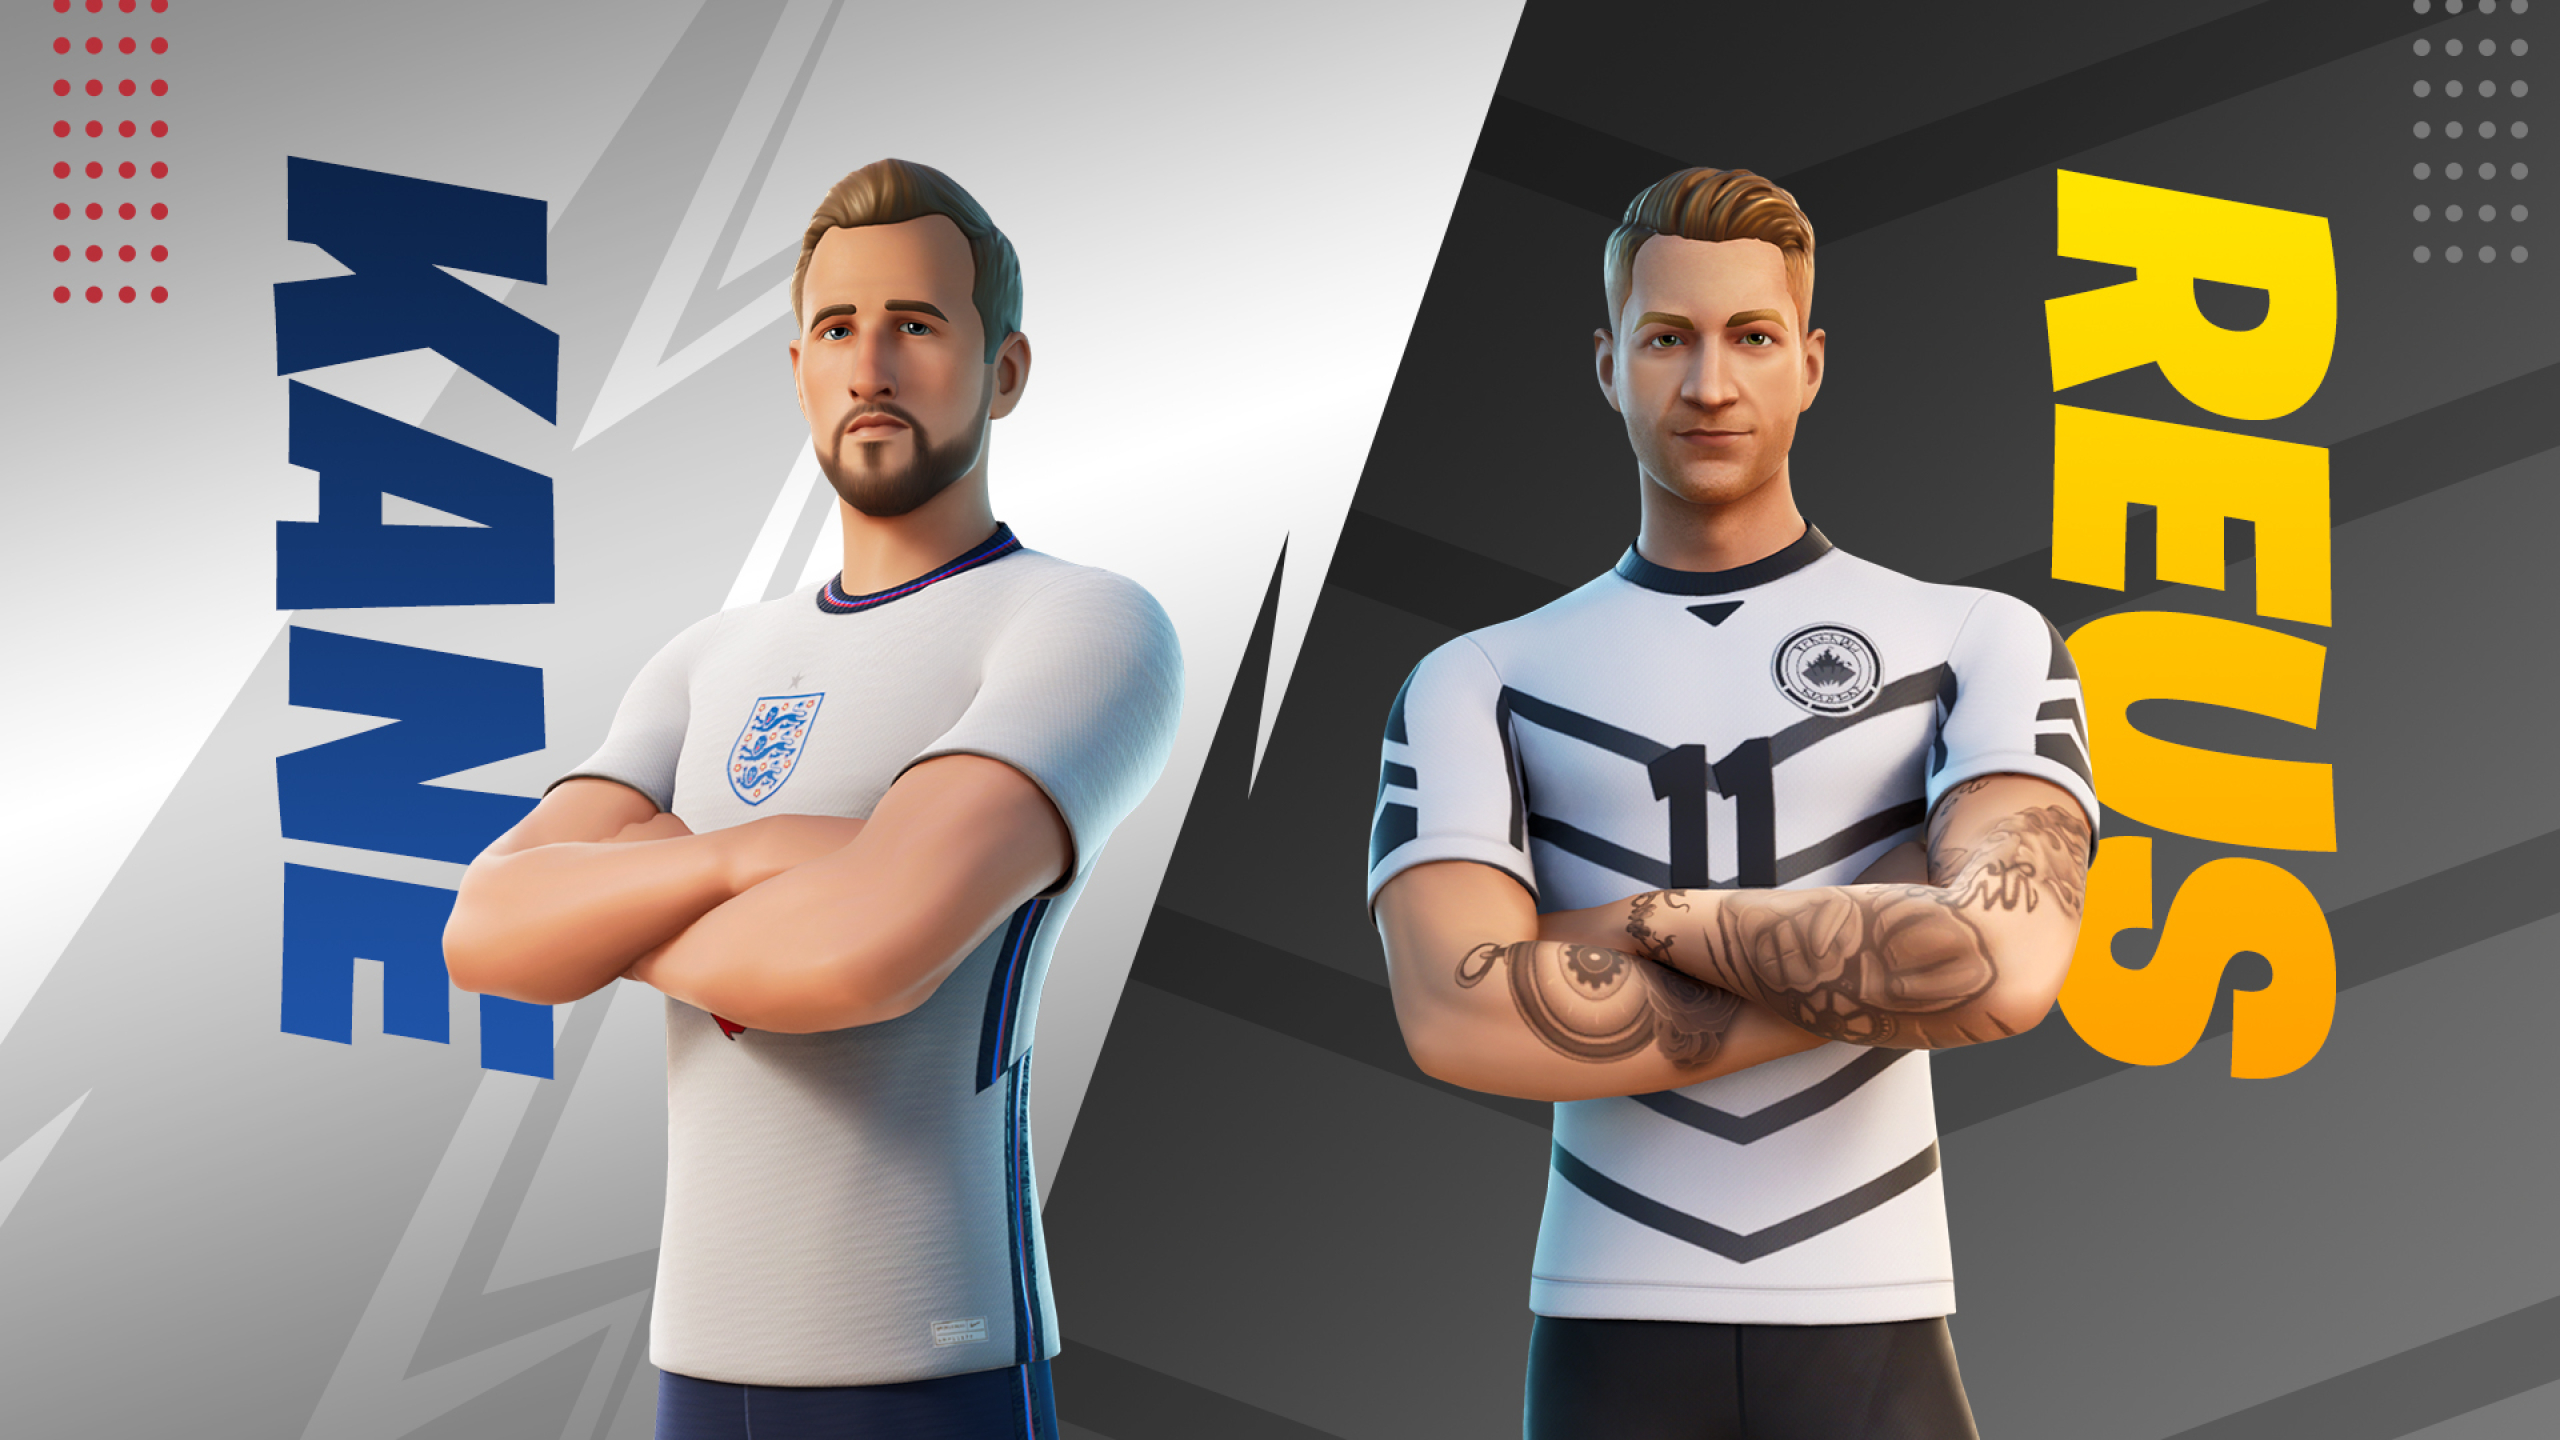 2560x1440 Harry Kane Marco Reus Fortnite 1440p Resolution Wallpaper Hd Games 4k Wallpapers Images Photos And Background Wallpapers Den